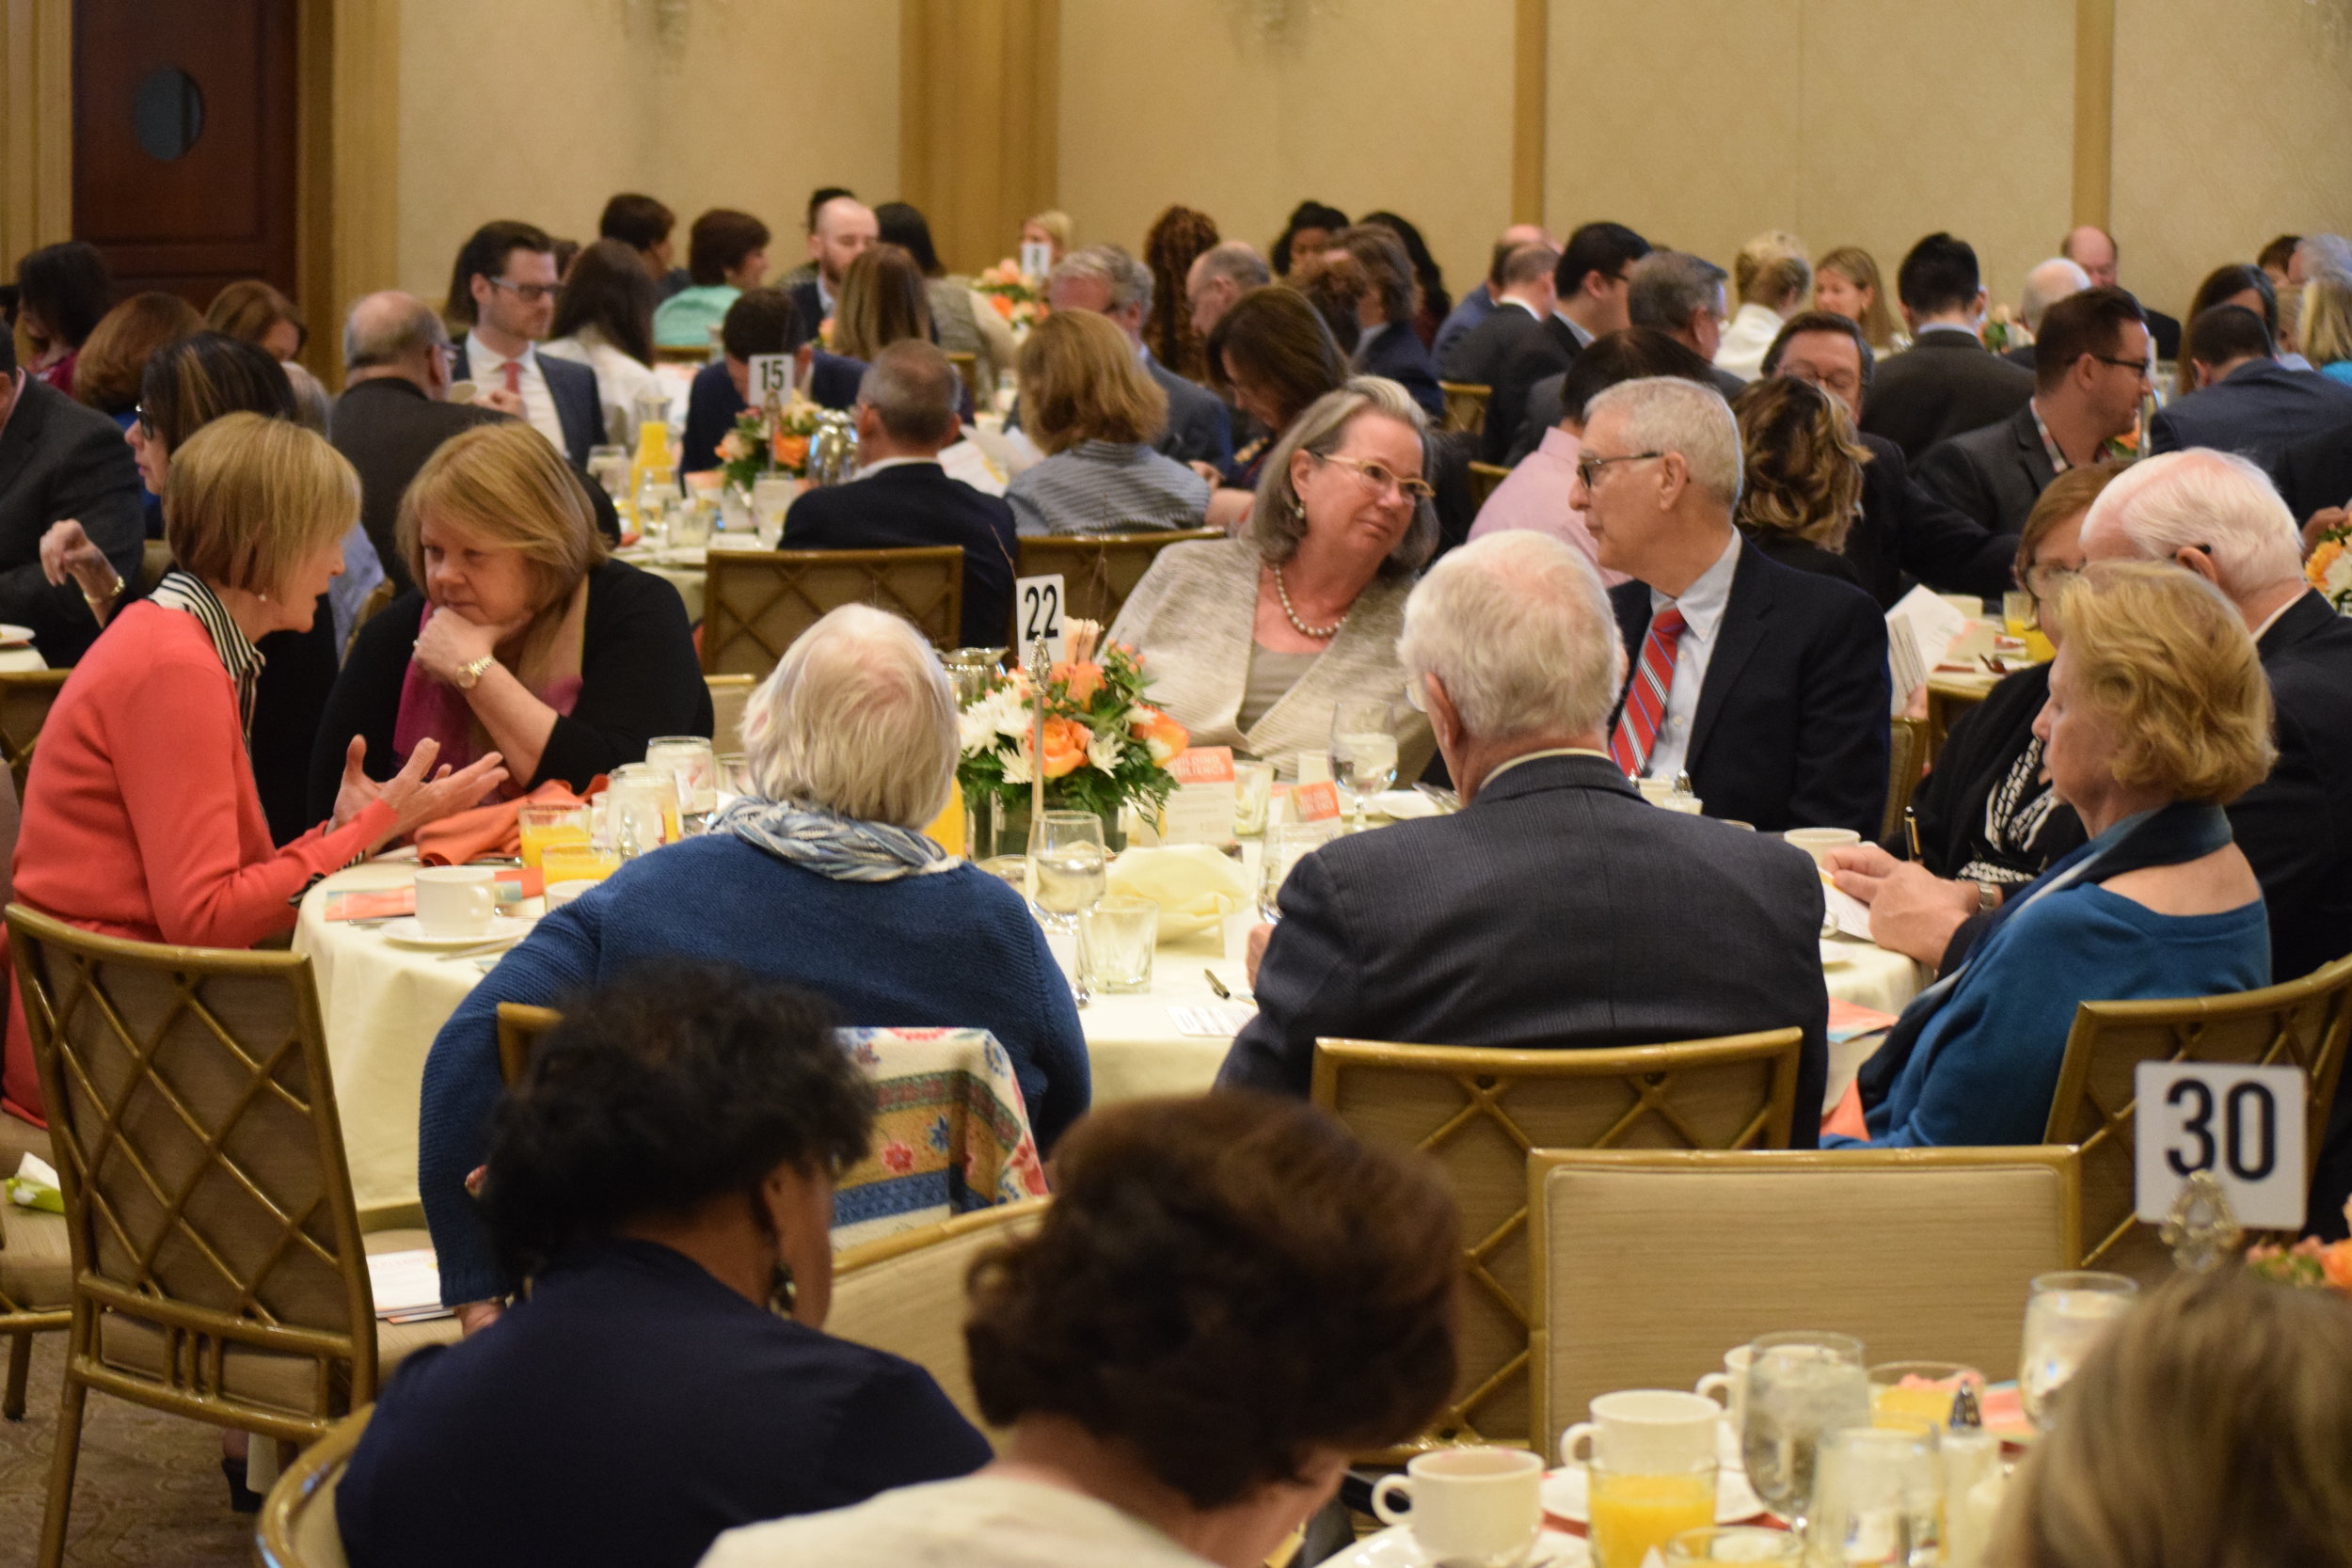  The Building a Brighter Future Breakfast drew more than 300 people. 